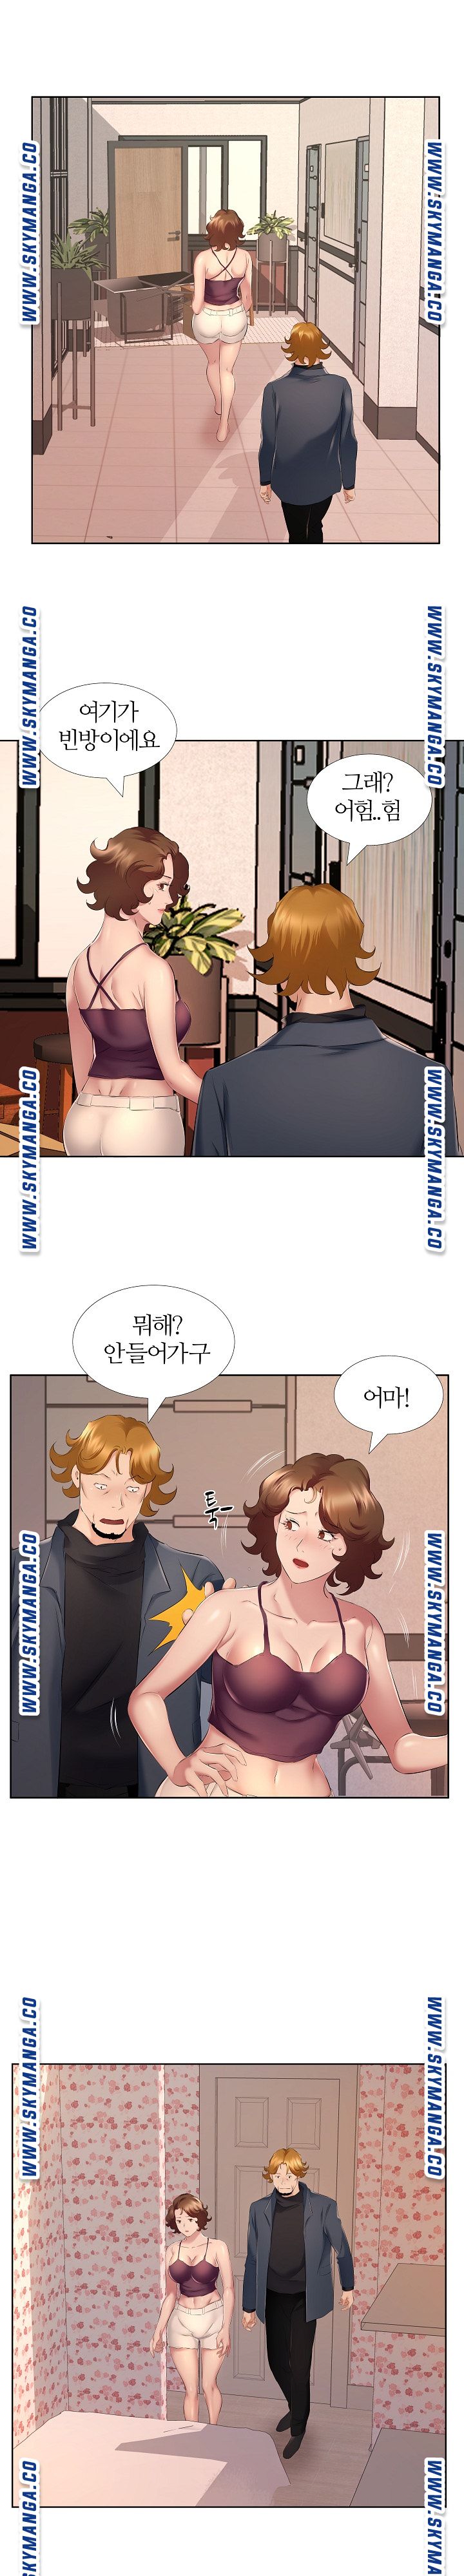 One Room Hotel Raw - Chapter 9 Page 6